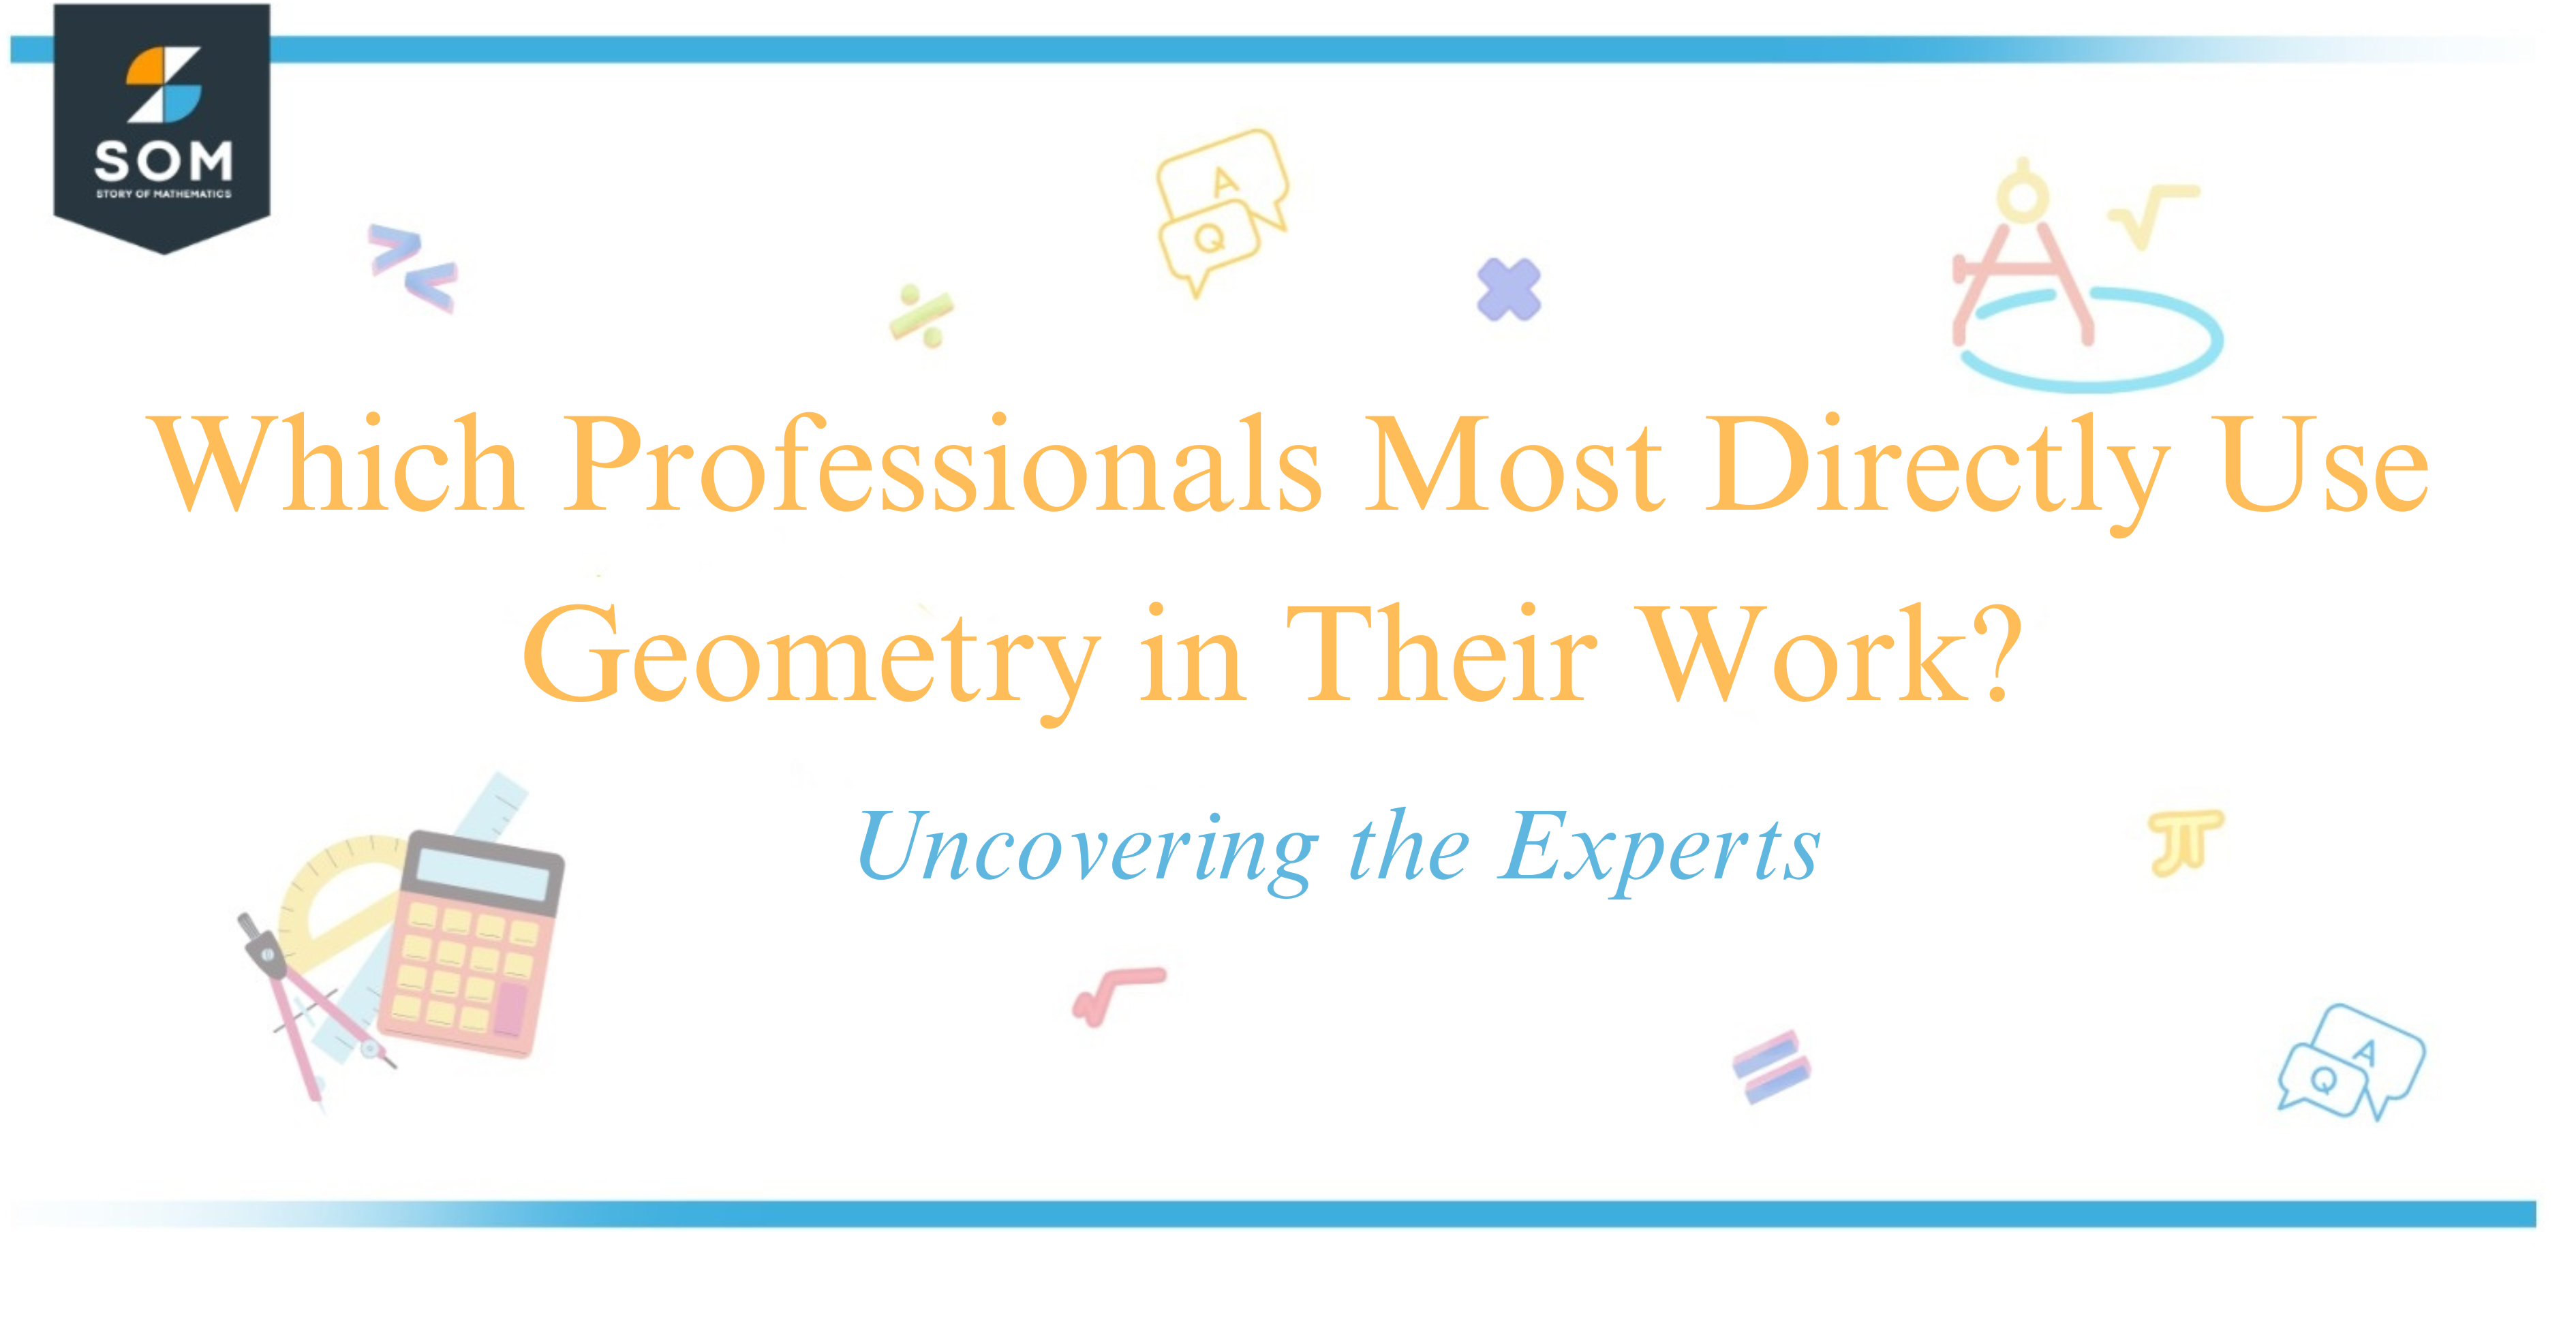 Which Professionals Most Directly Use Geometry in Their Work Uncovering the Experts